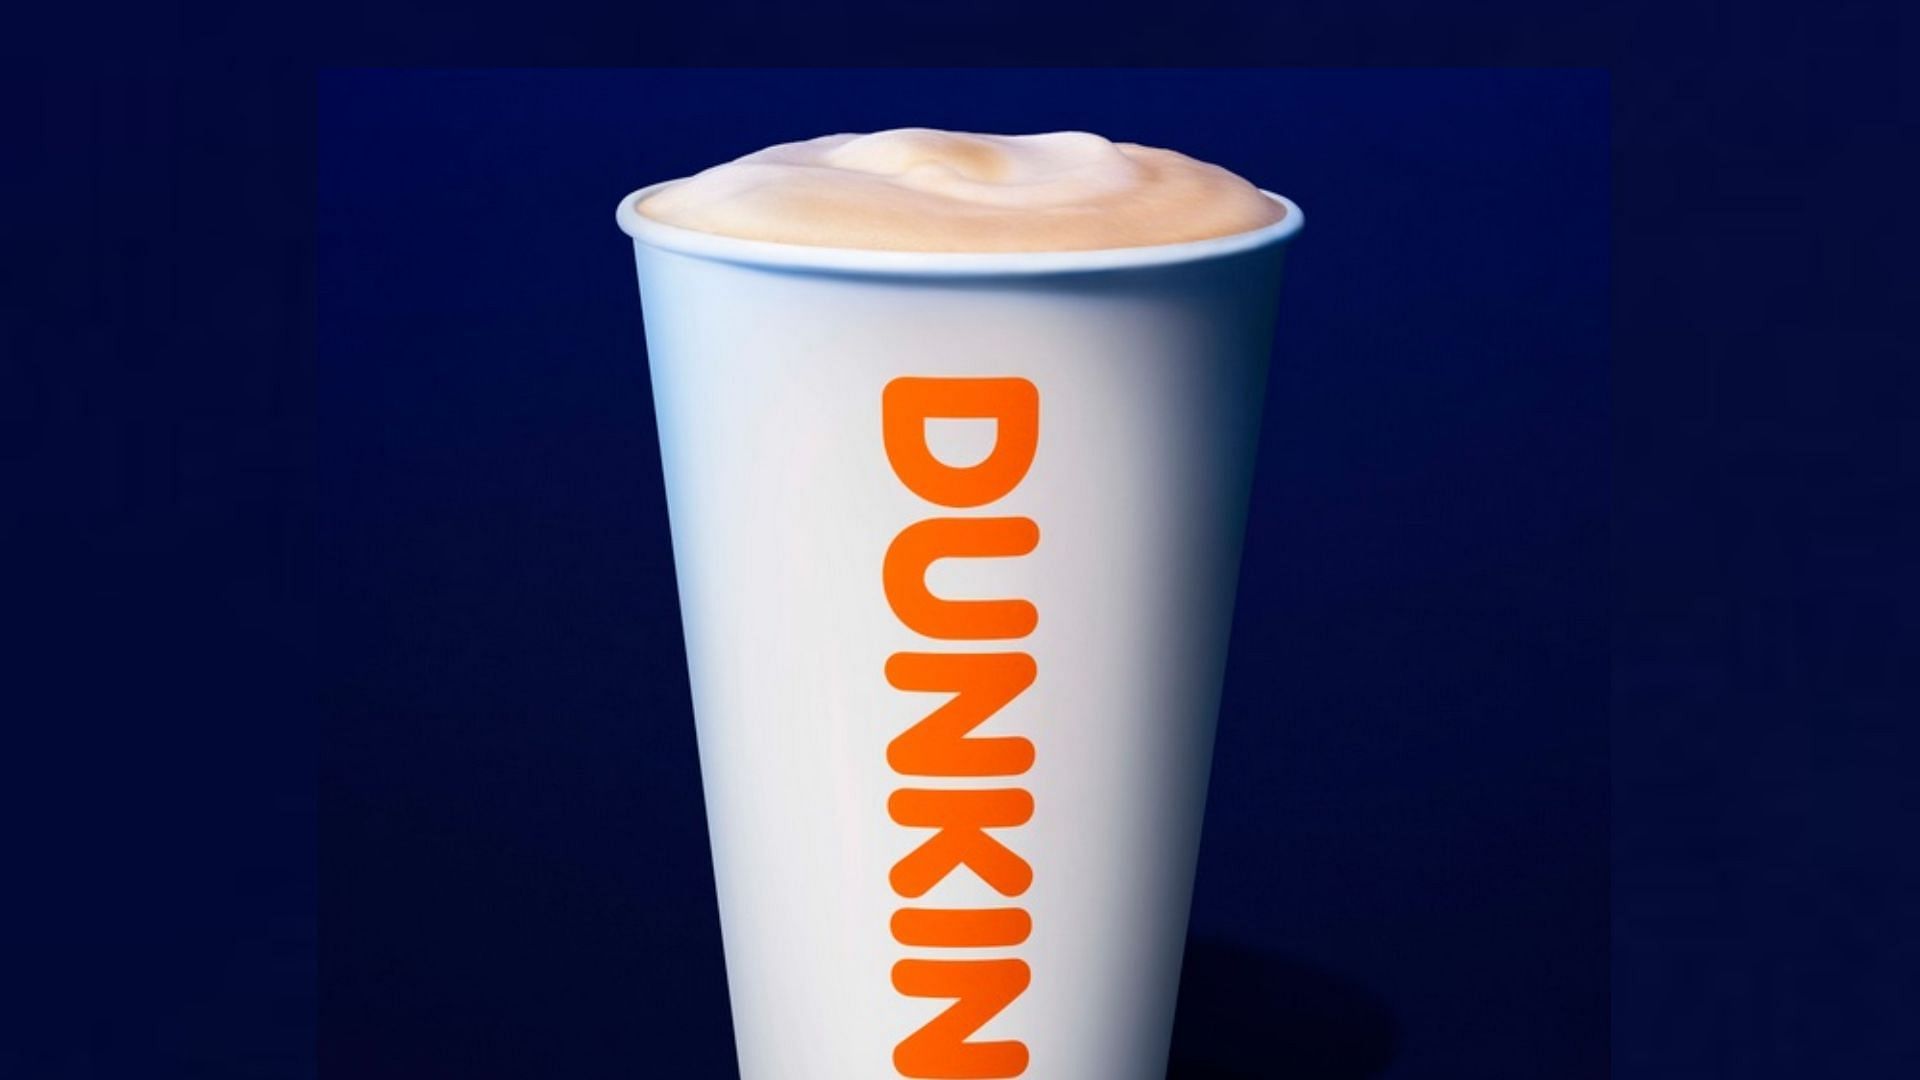 the new flavorful Brown Butter Toffee Latte debuts on the menu starting December 28 (Image via Dunkin&rsquo; Donuts)